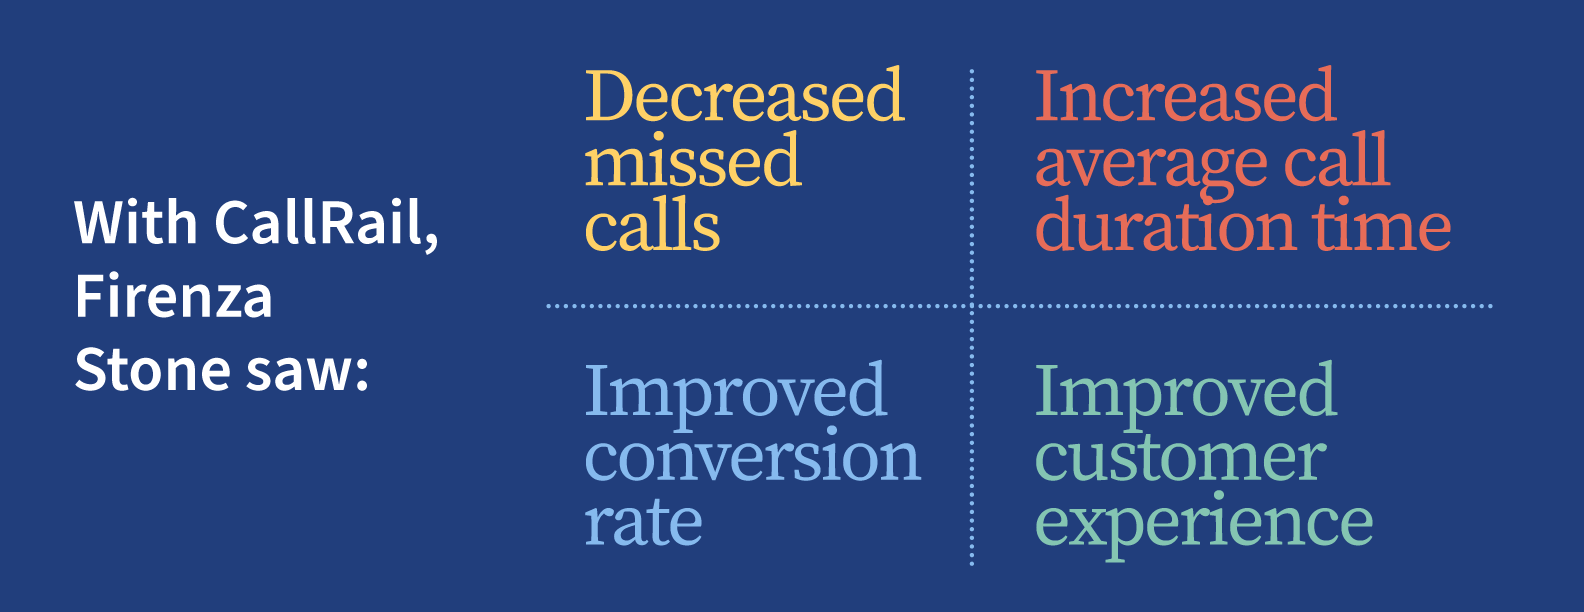 With CallRail, Firenza Stone saw- Decreased missed calls Improved conversion rate Increased average call duration time Improved customer experience